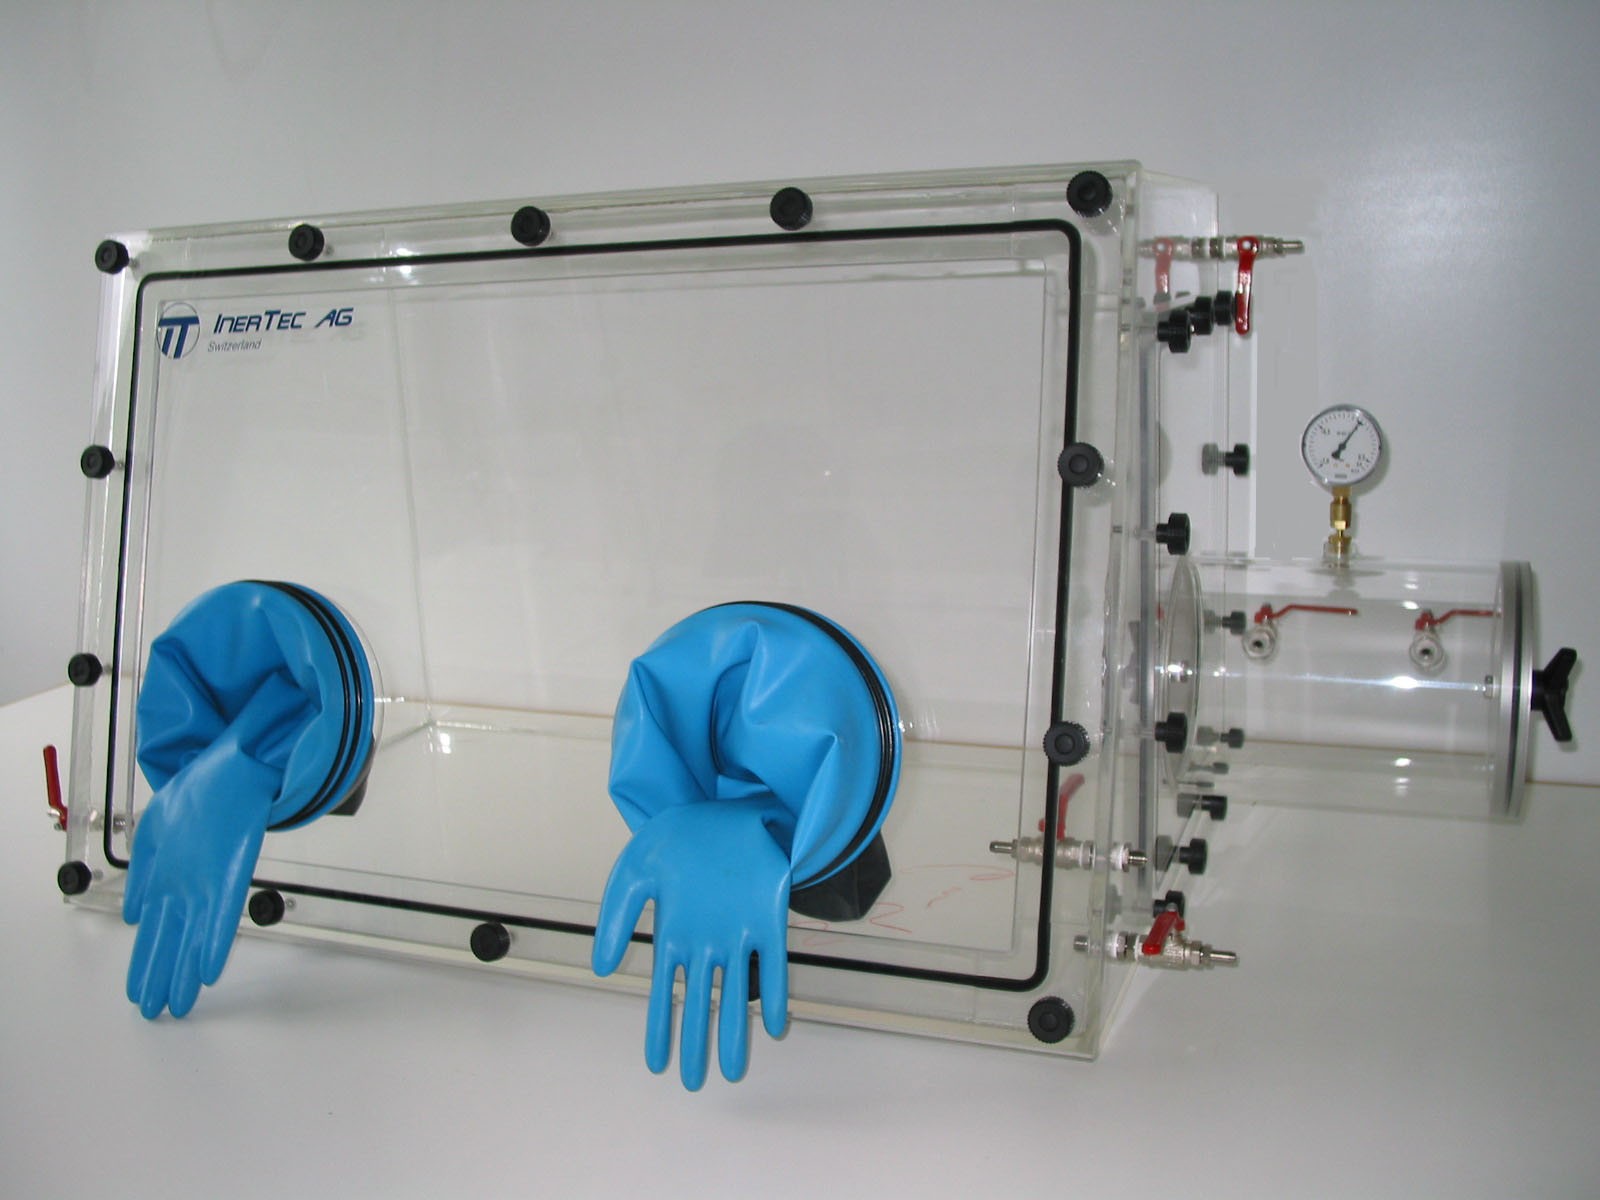 Glovebox made of acrylic&gt; Gas filling: by hand, front design: removable, side design: rectangular lock, control: humidity display